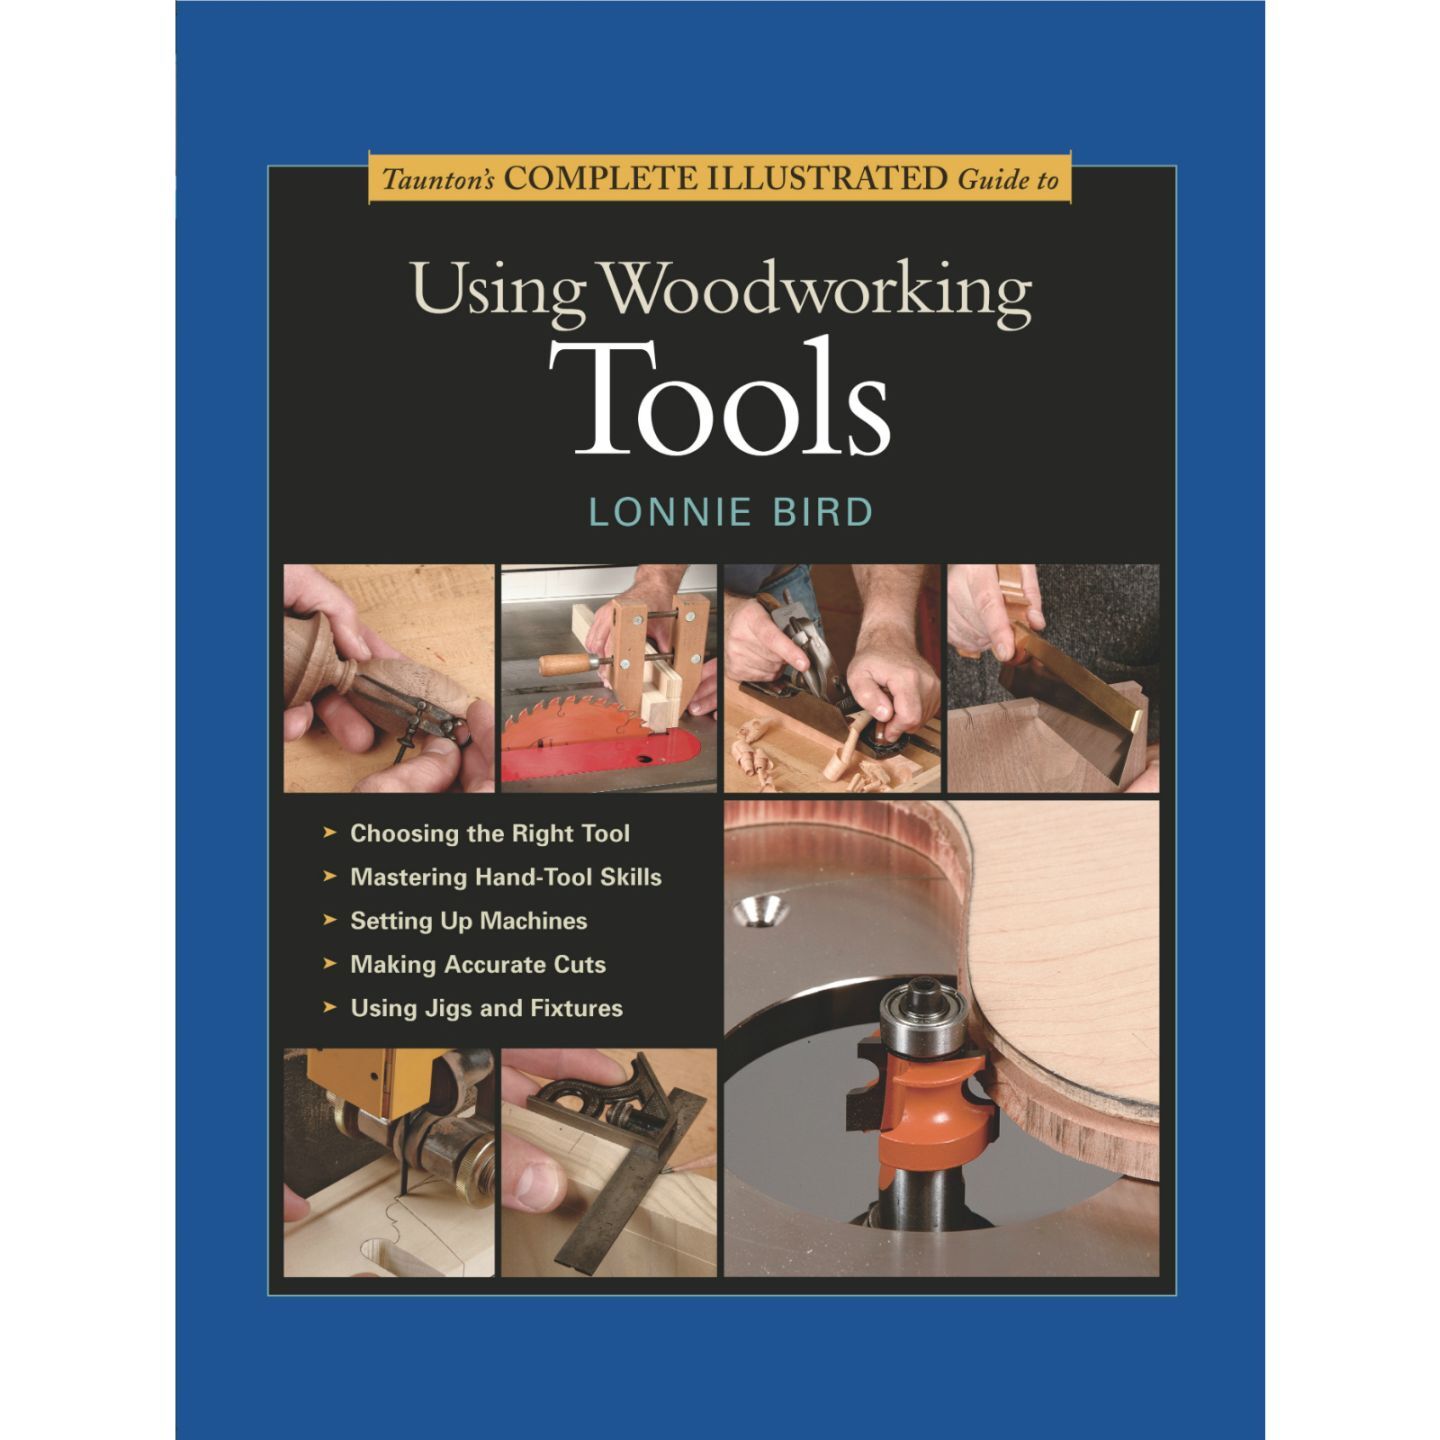 Complete Illustrated Guide to Using Woodworking Tools